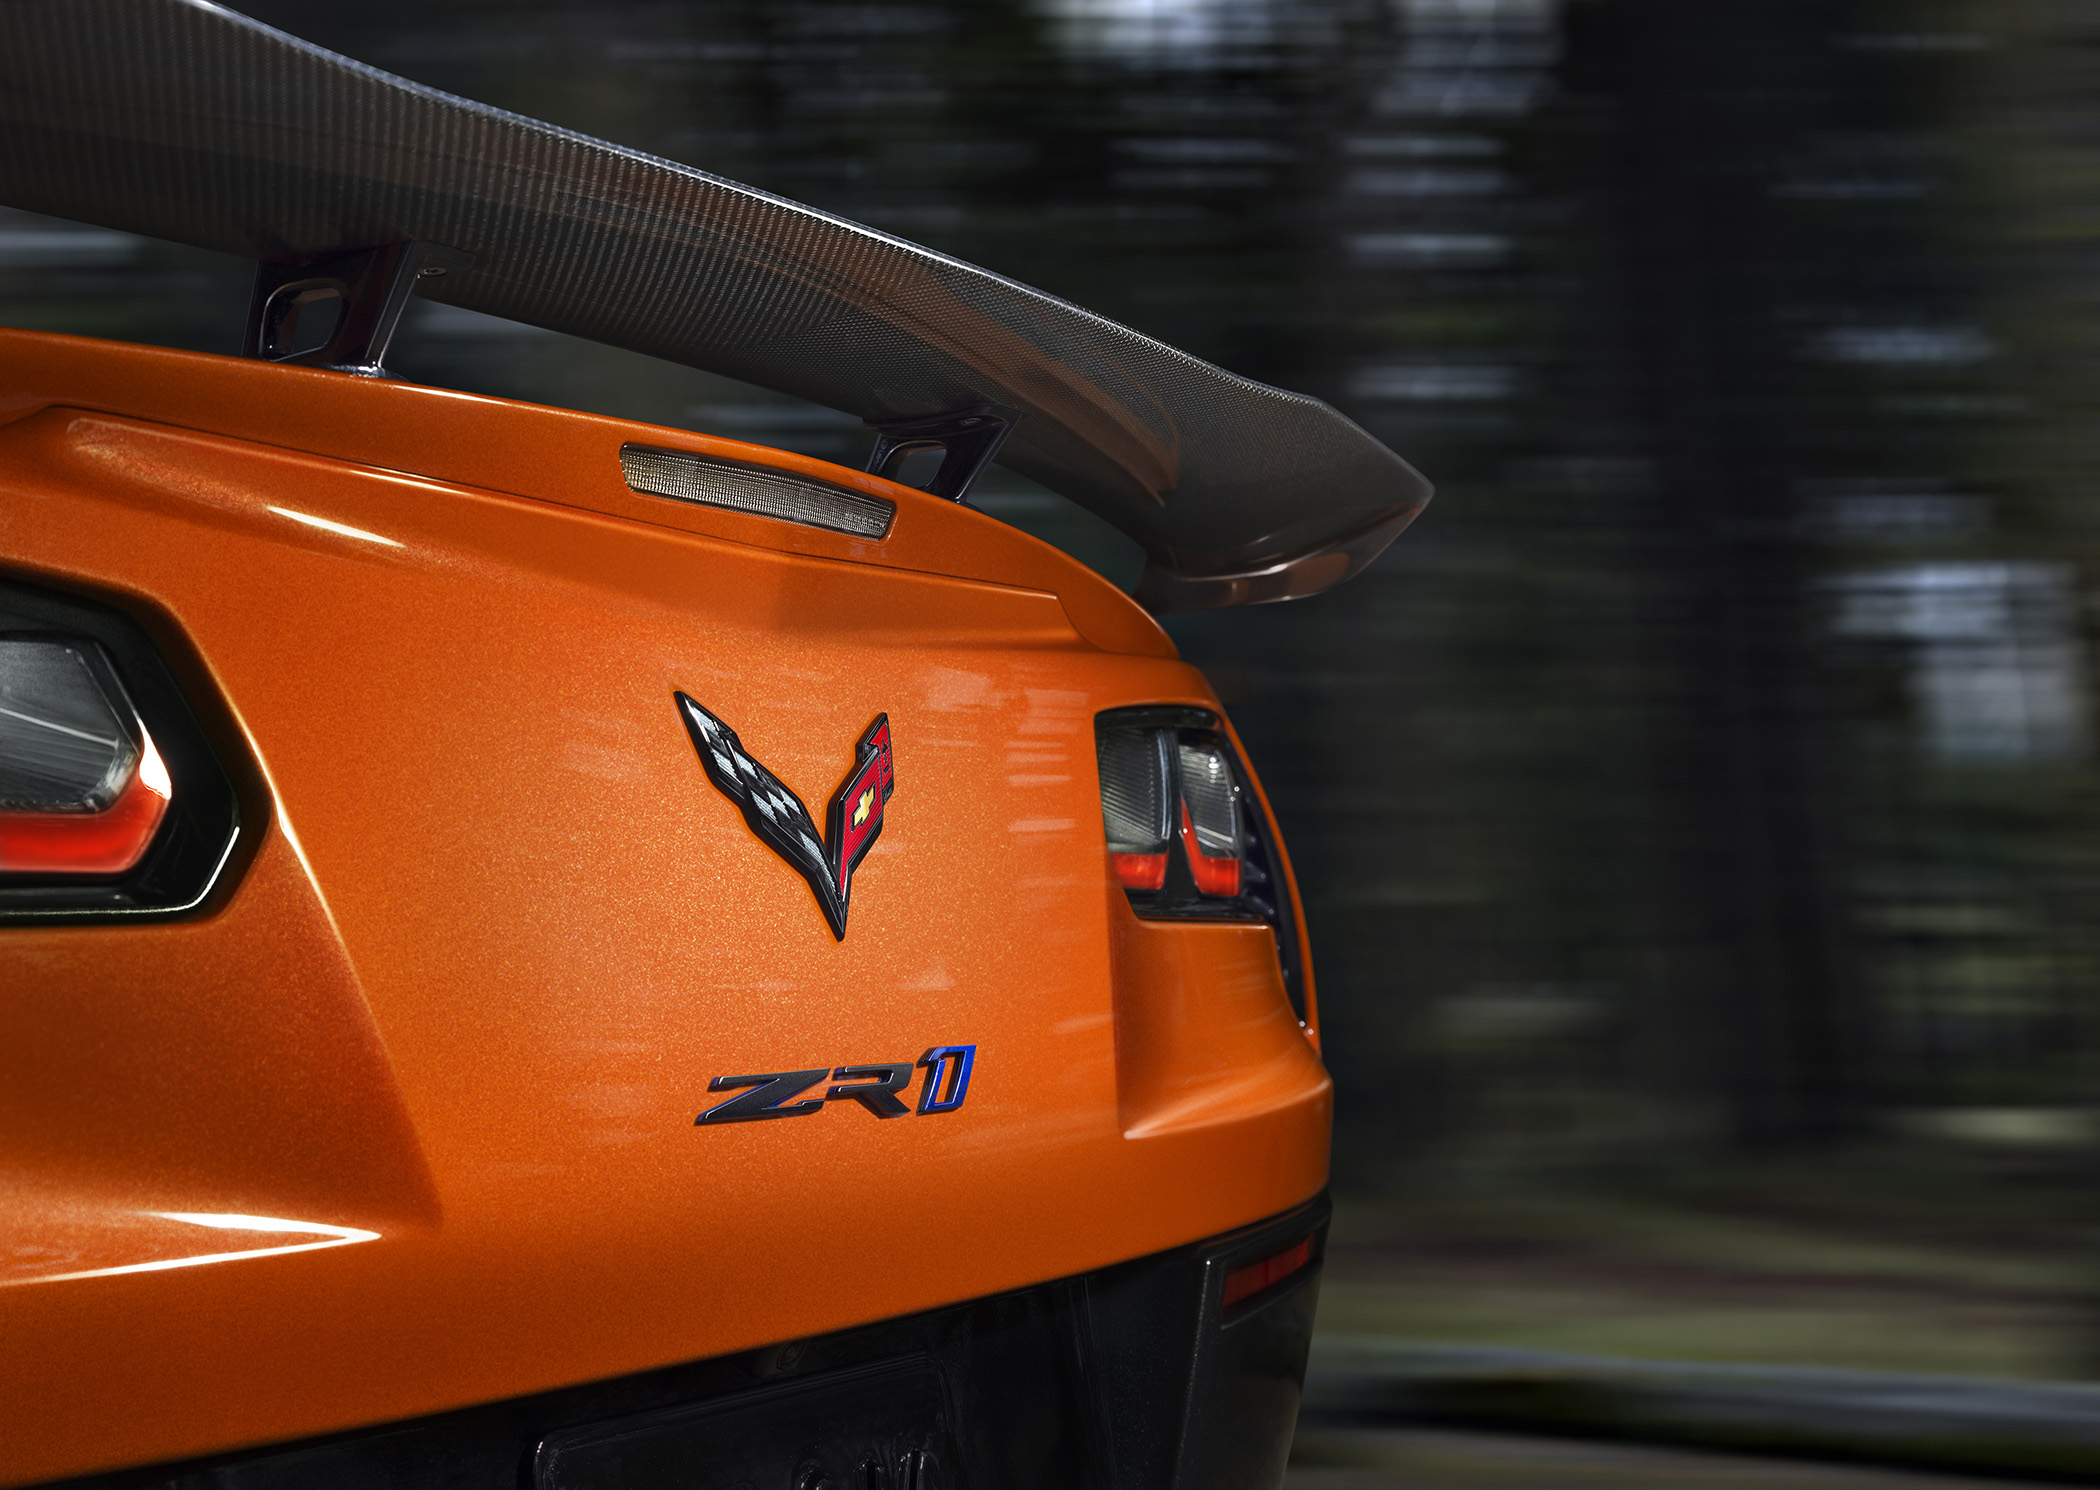 The fastest, most powerful production Corvette ever – the 755-horsepower 2019 ZR1.